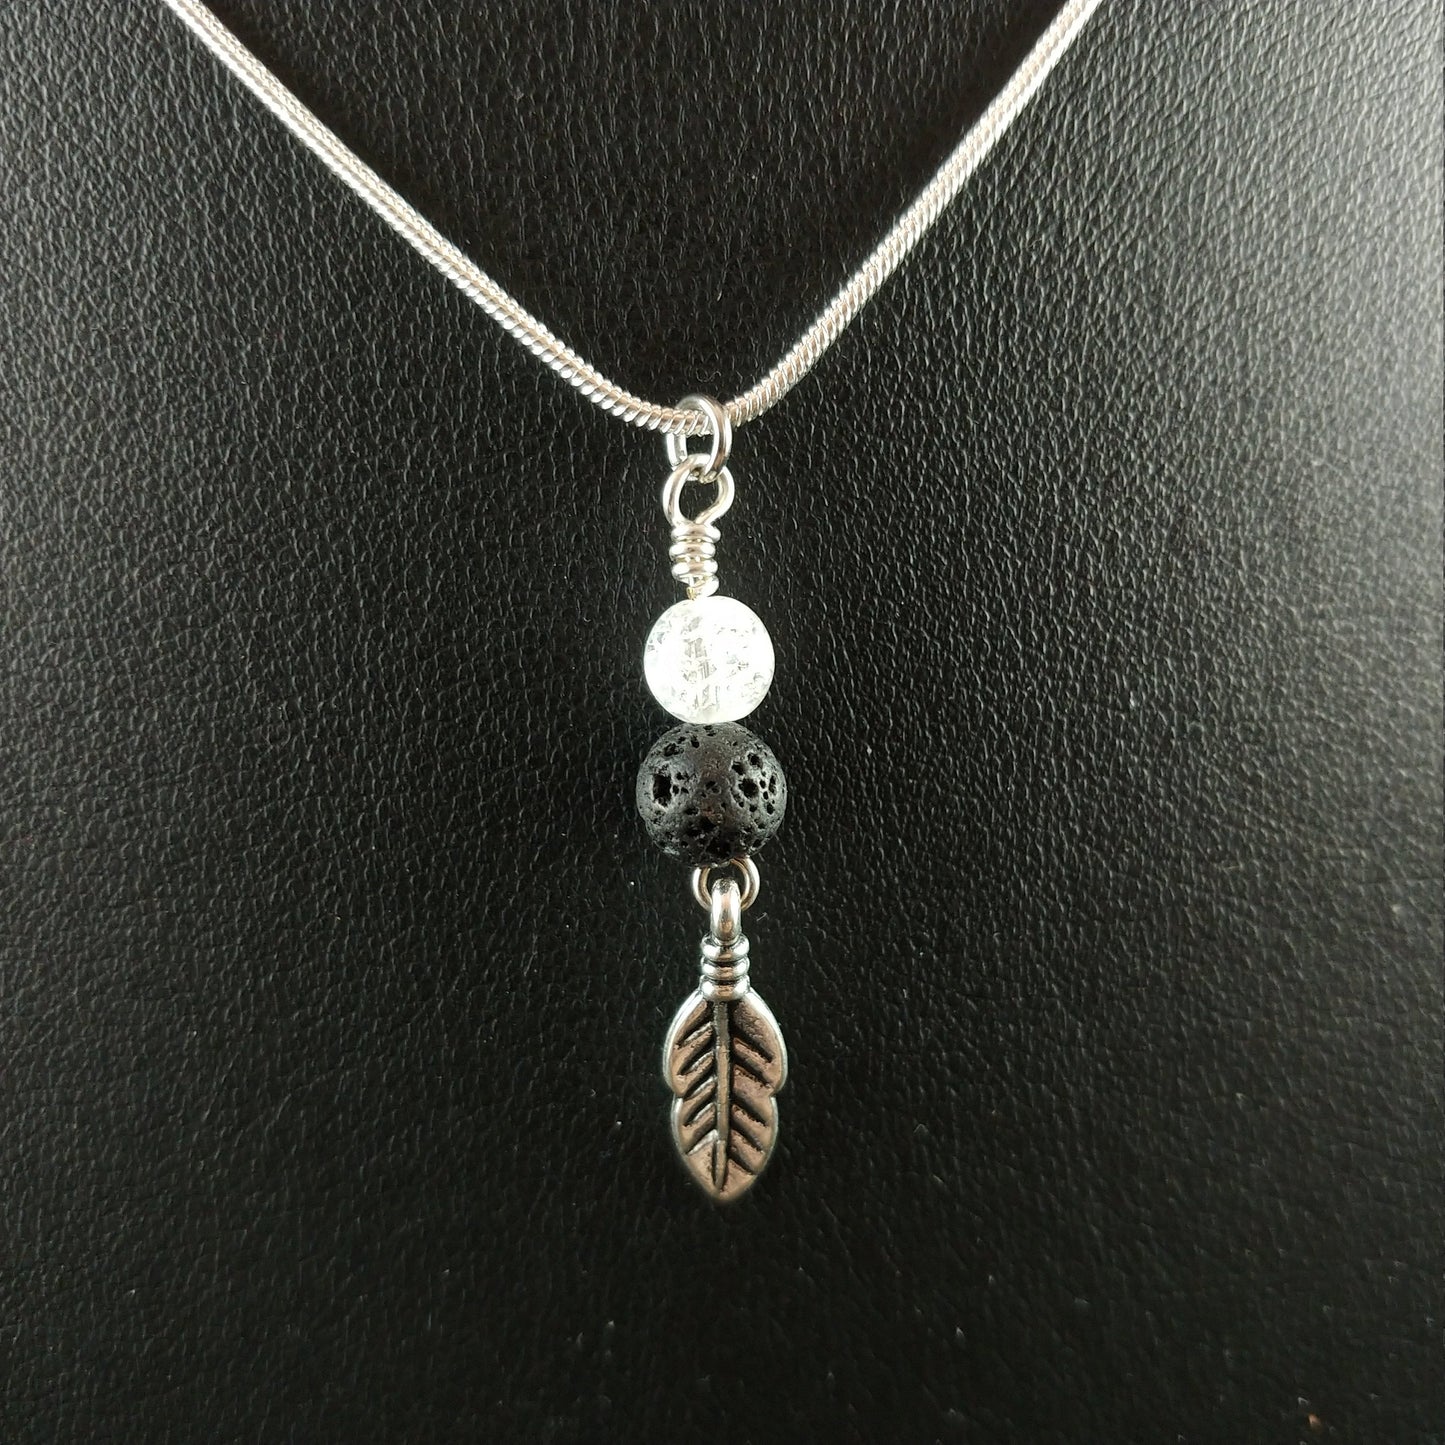 Crystal and Lava Necklace with dangling Leaf charm